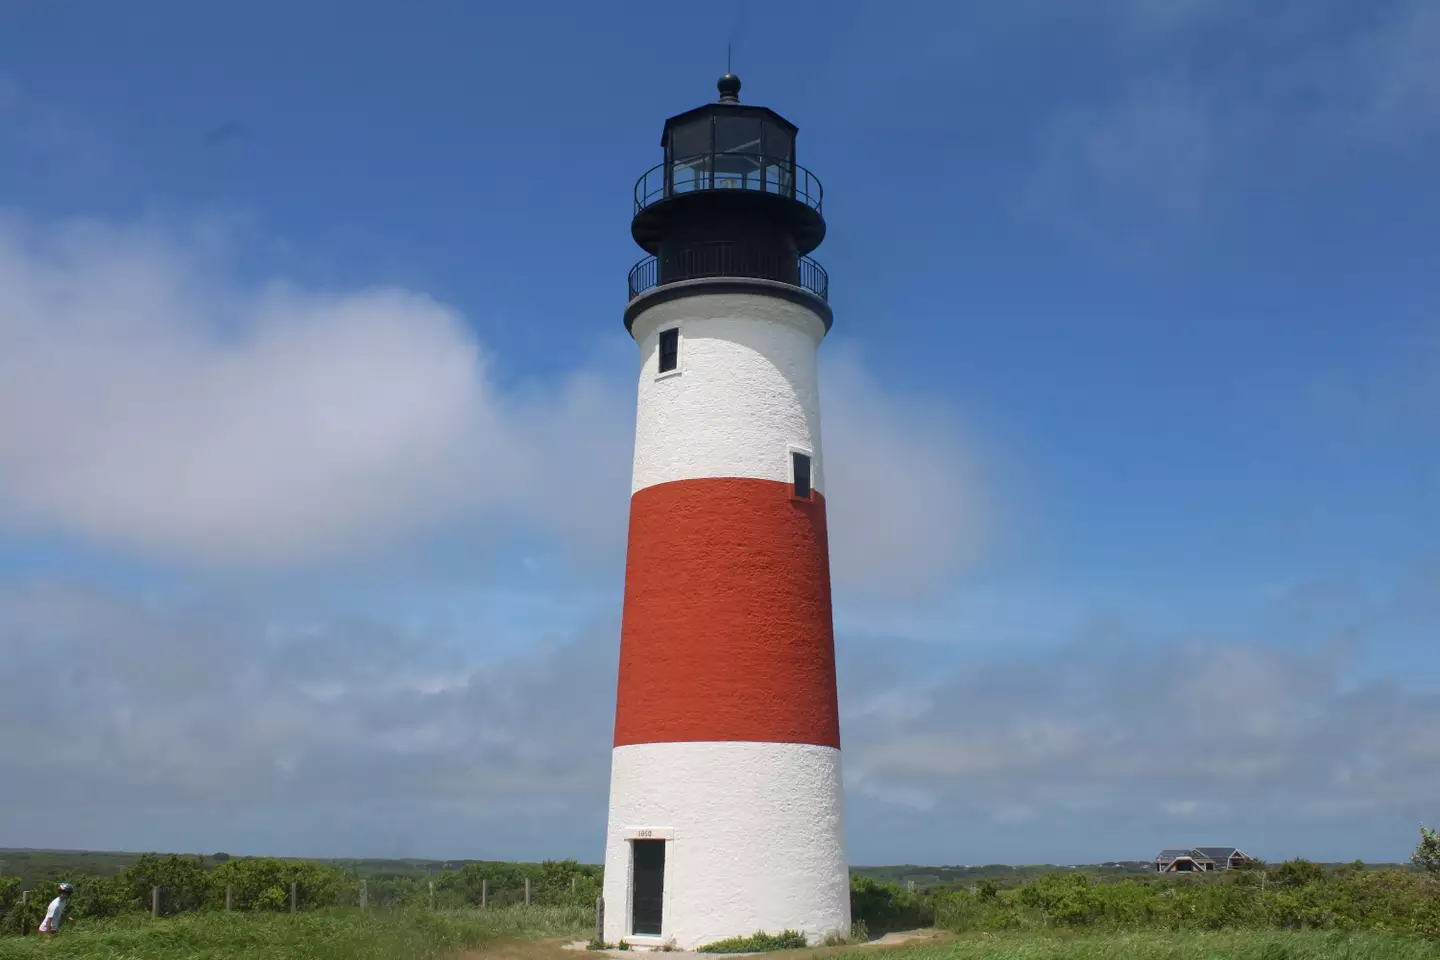 Nantucket is mostly known for its nature and lighthouses, like the Sankaty Head Lighthouse.